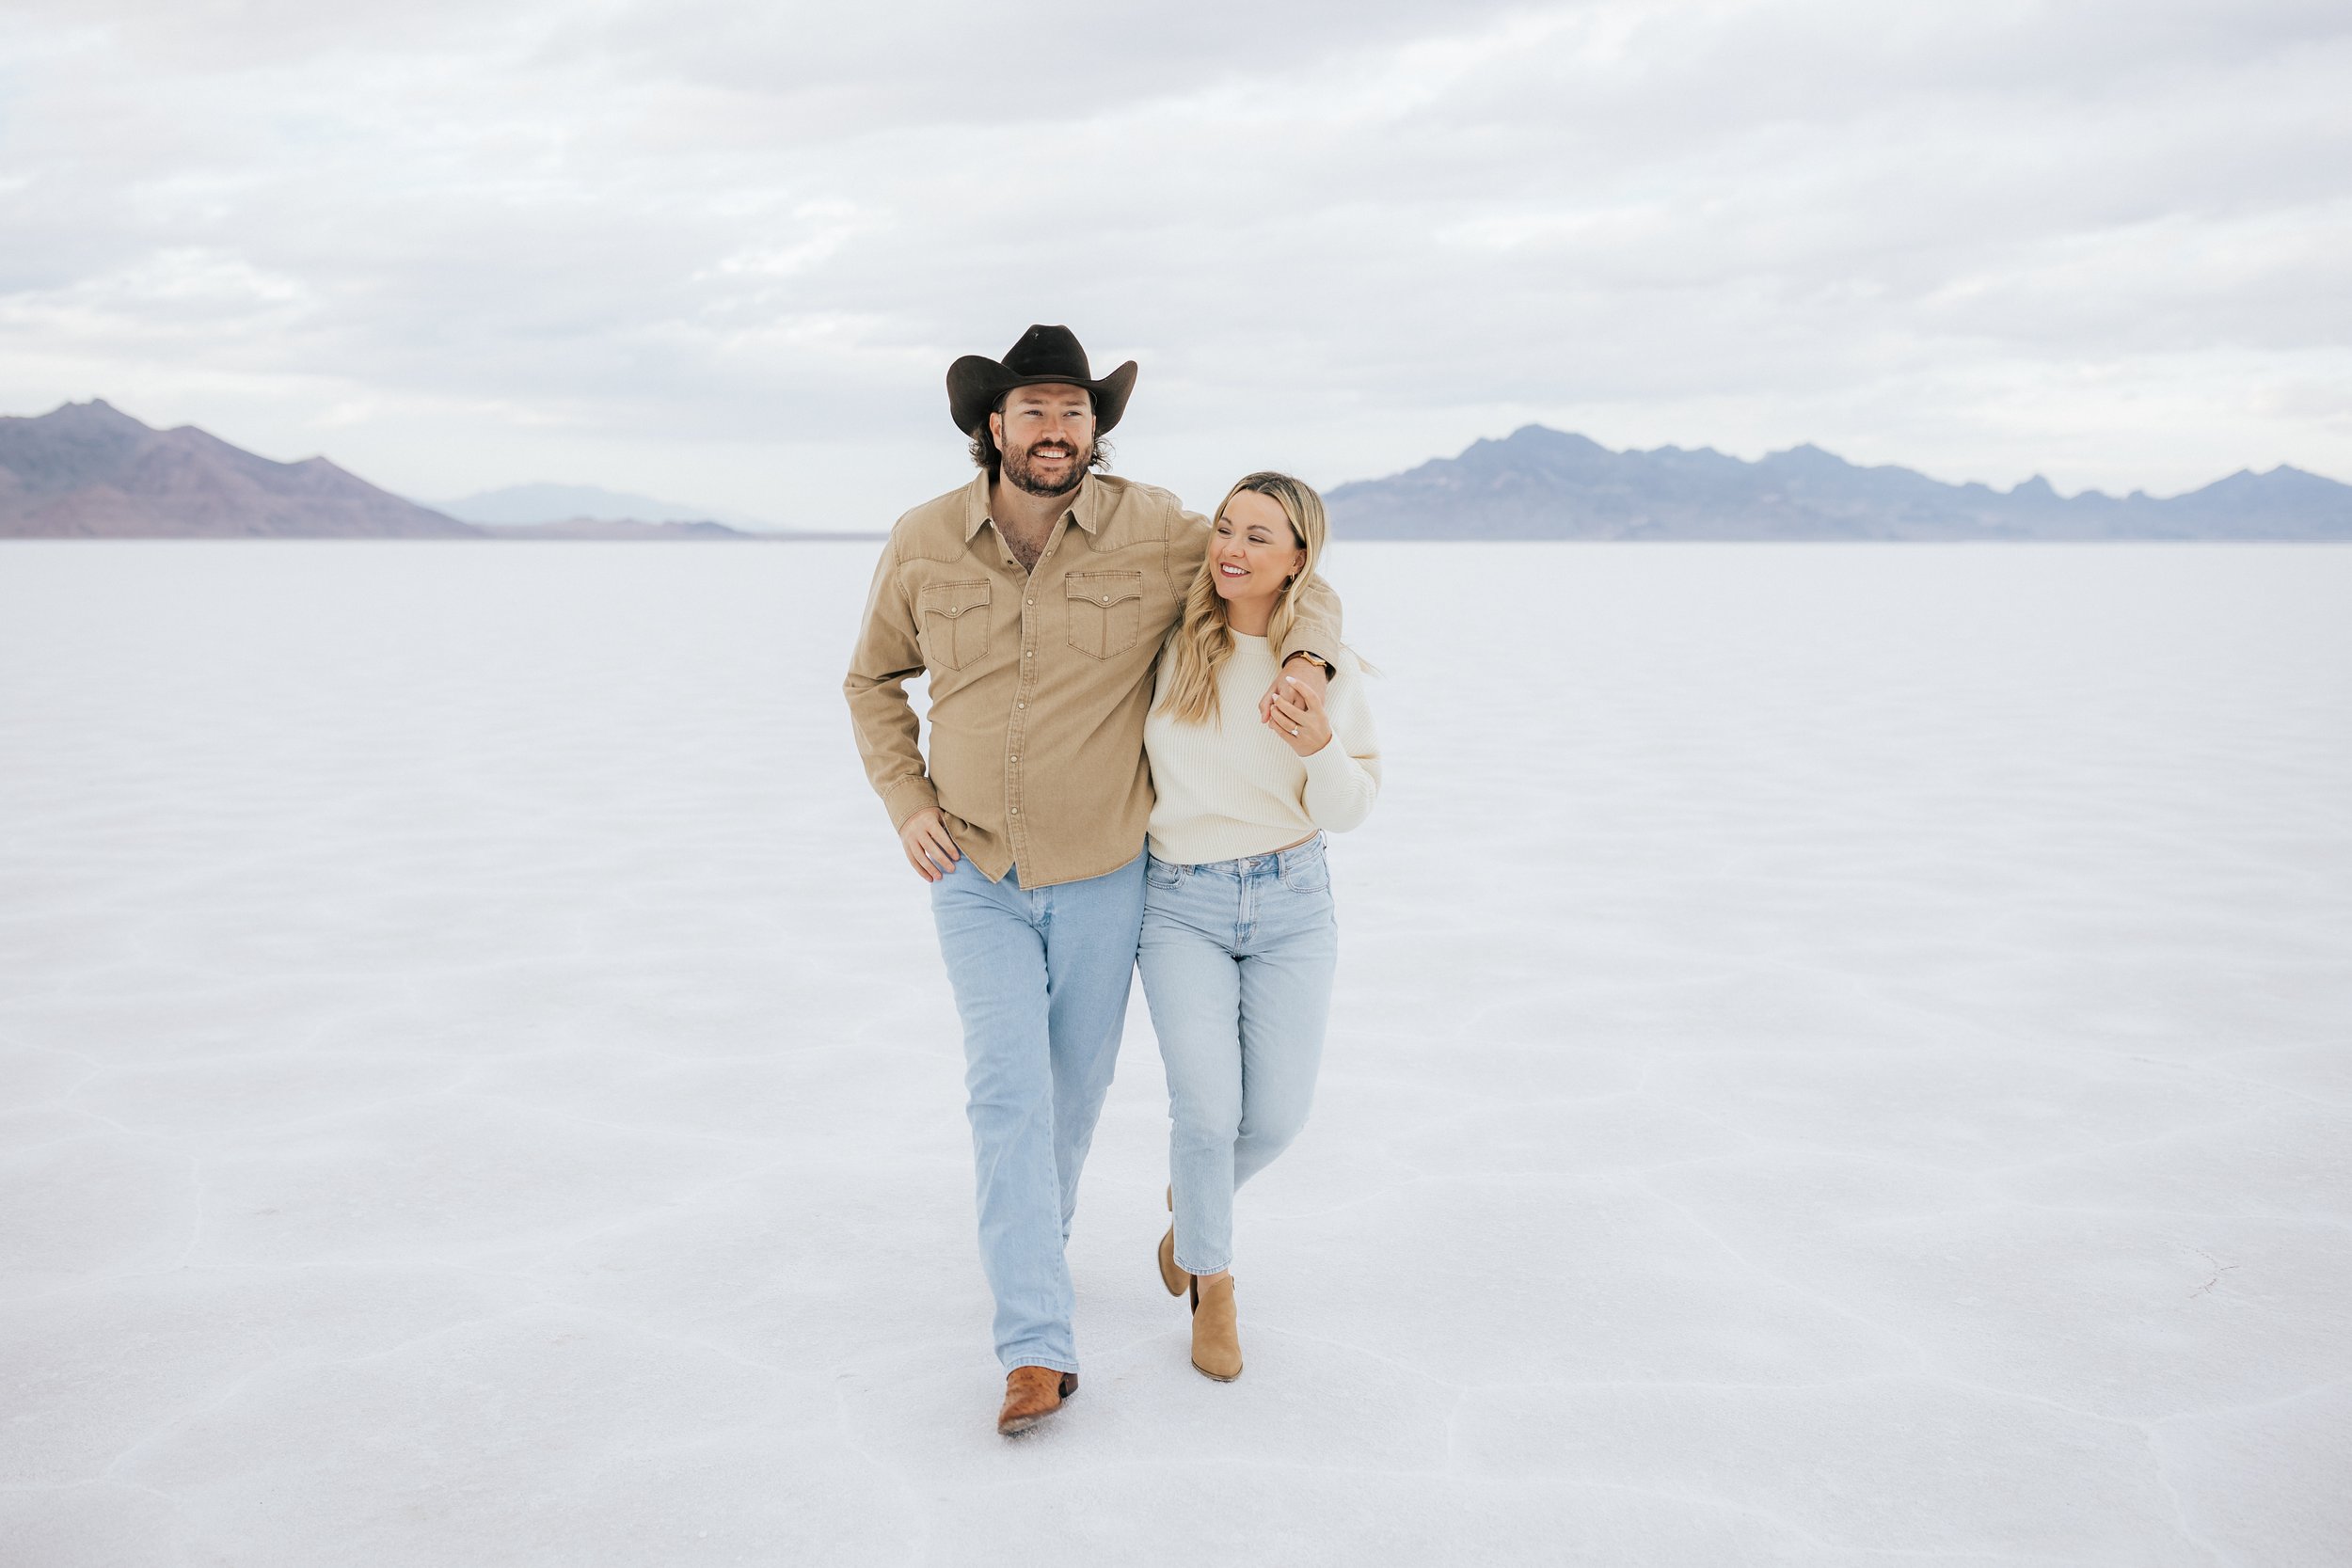  Photo of an engaged couple as they kiss and hug at the Bonneville Salt Flats near Wendover, Nevada and Salt Lake City, Utah. Cowboy and his girl walk together with his arm around her shoulder. The Salt Flats are white and the sky is overcast. The mo